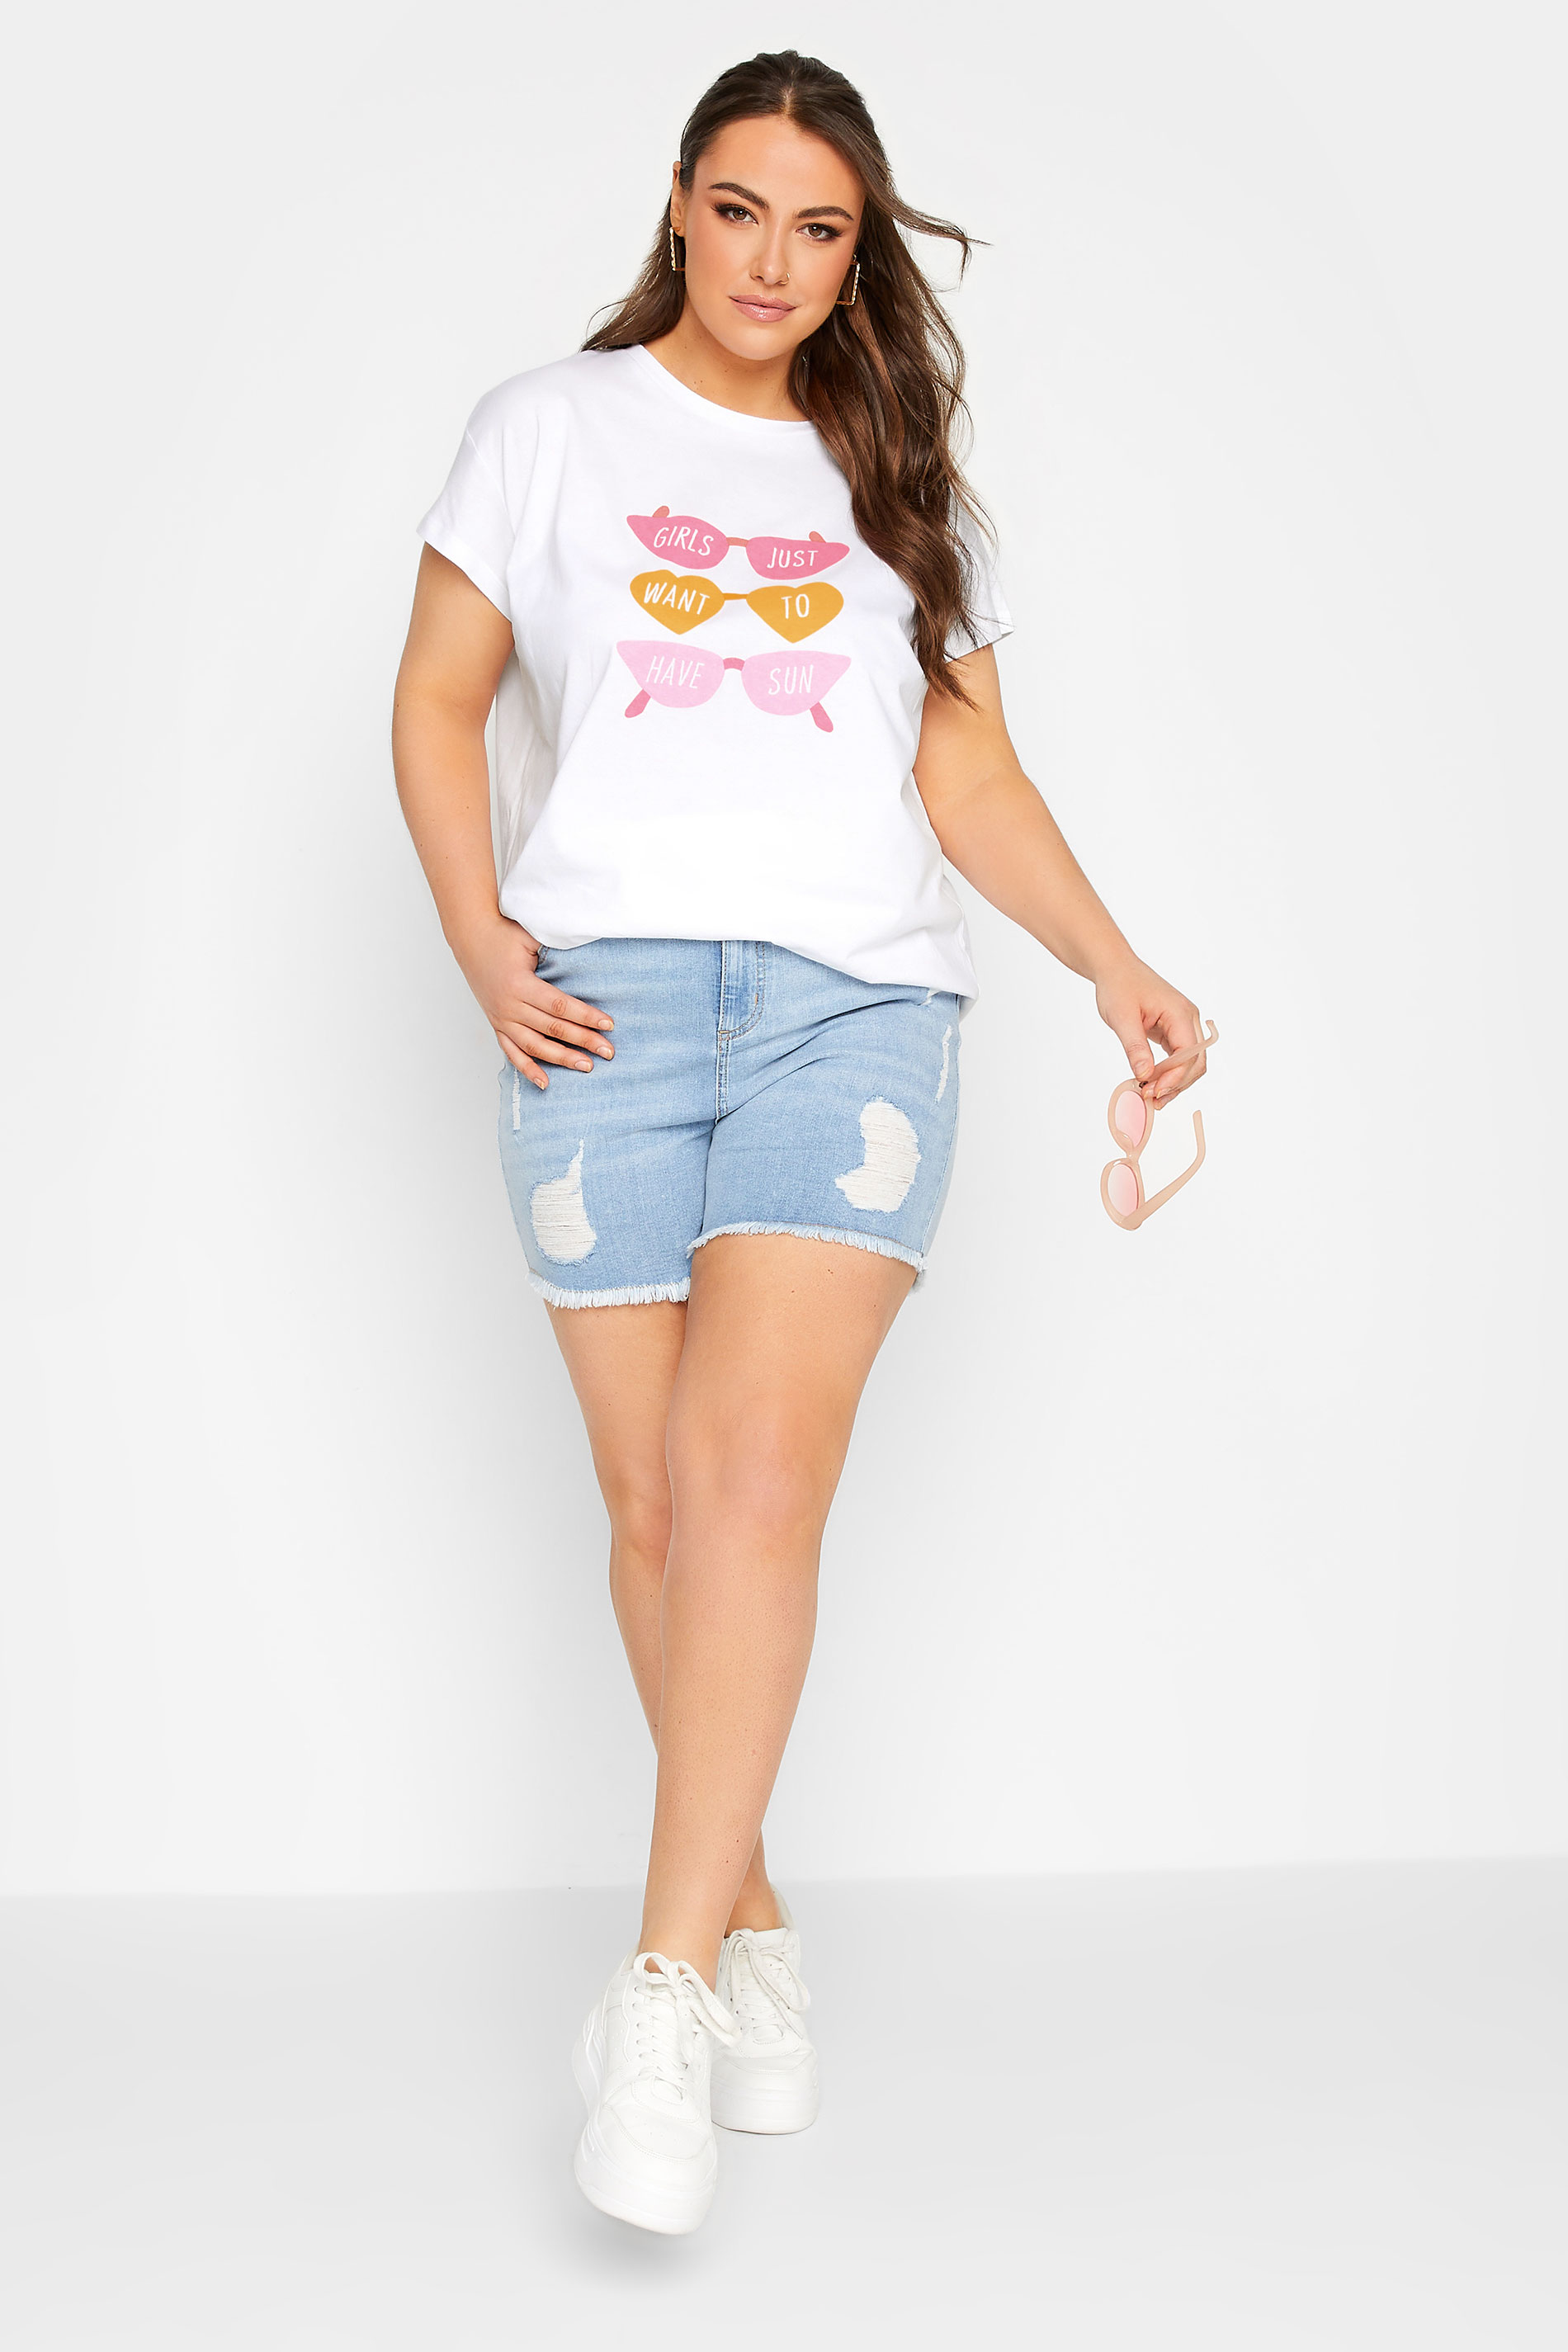 LIMITED COLLECTION Plus Size White 'Girls Want Sun' Slogan Print T-Shirt | Yours Clothing 2